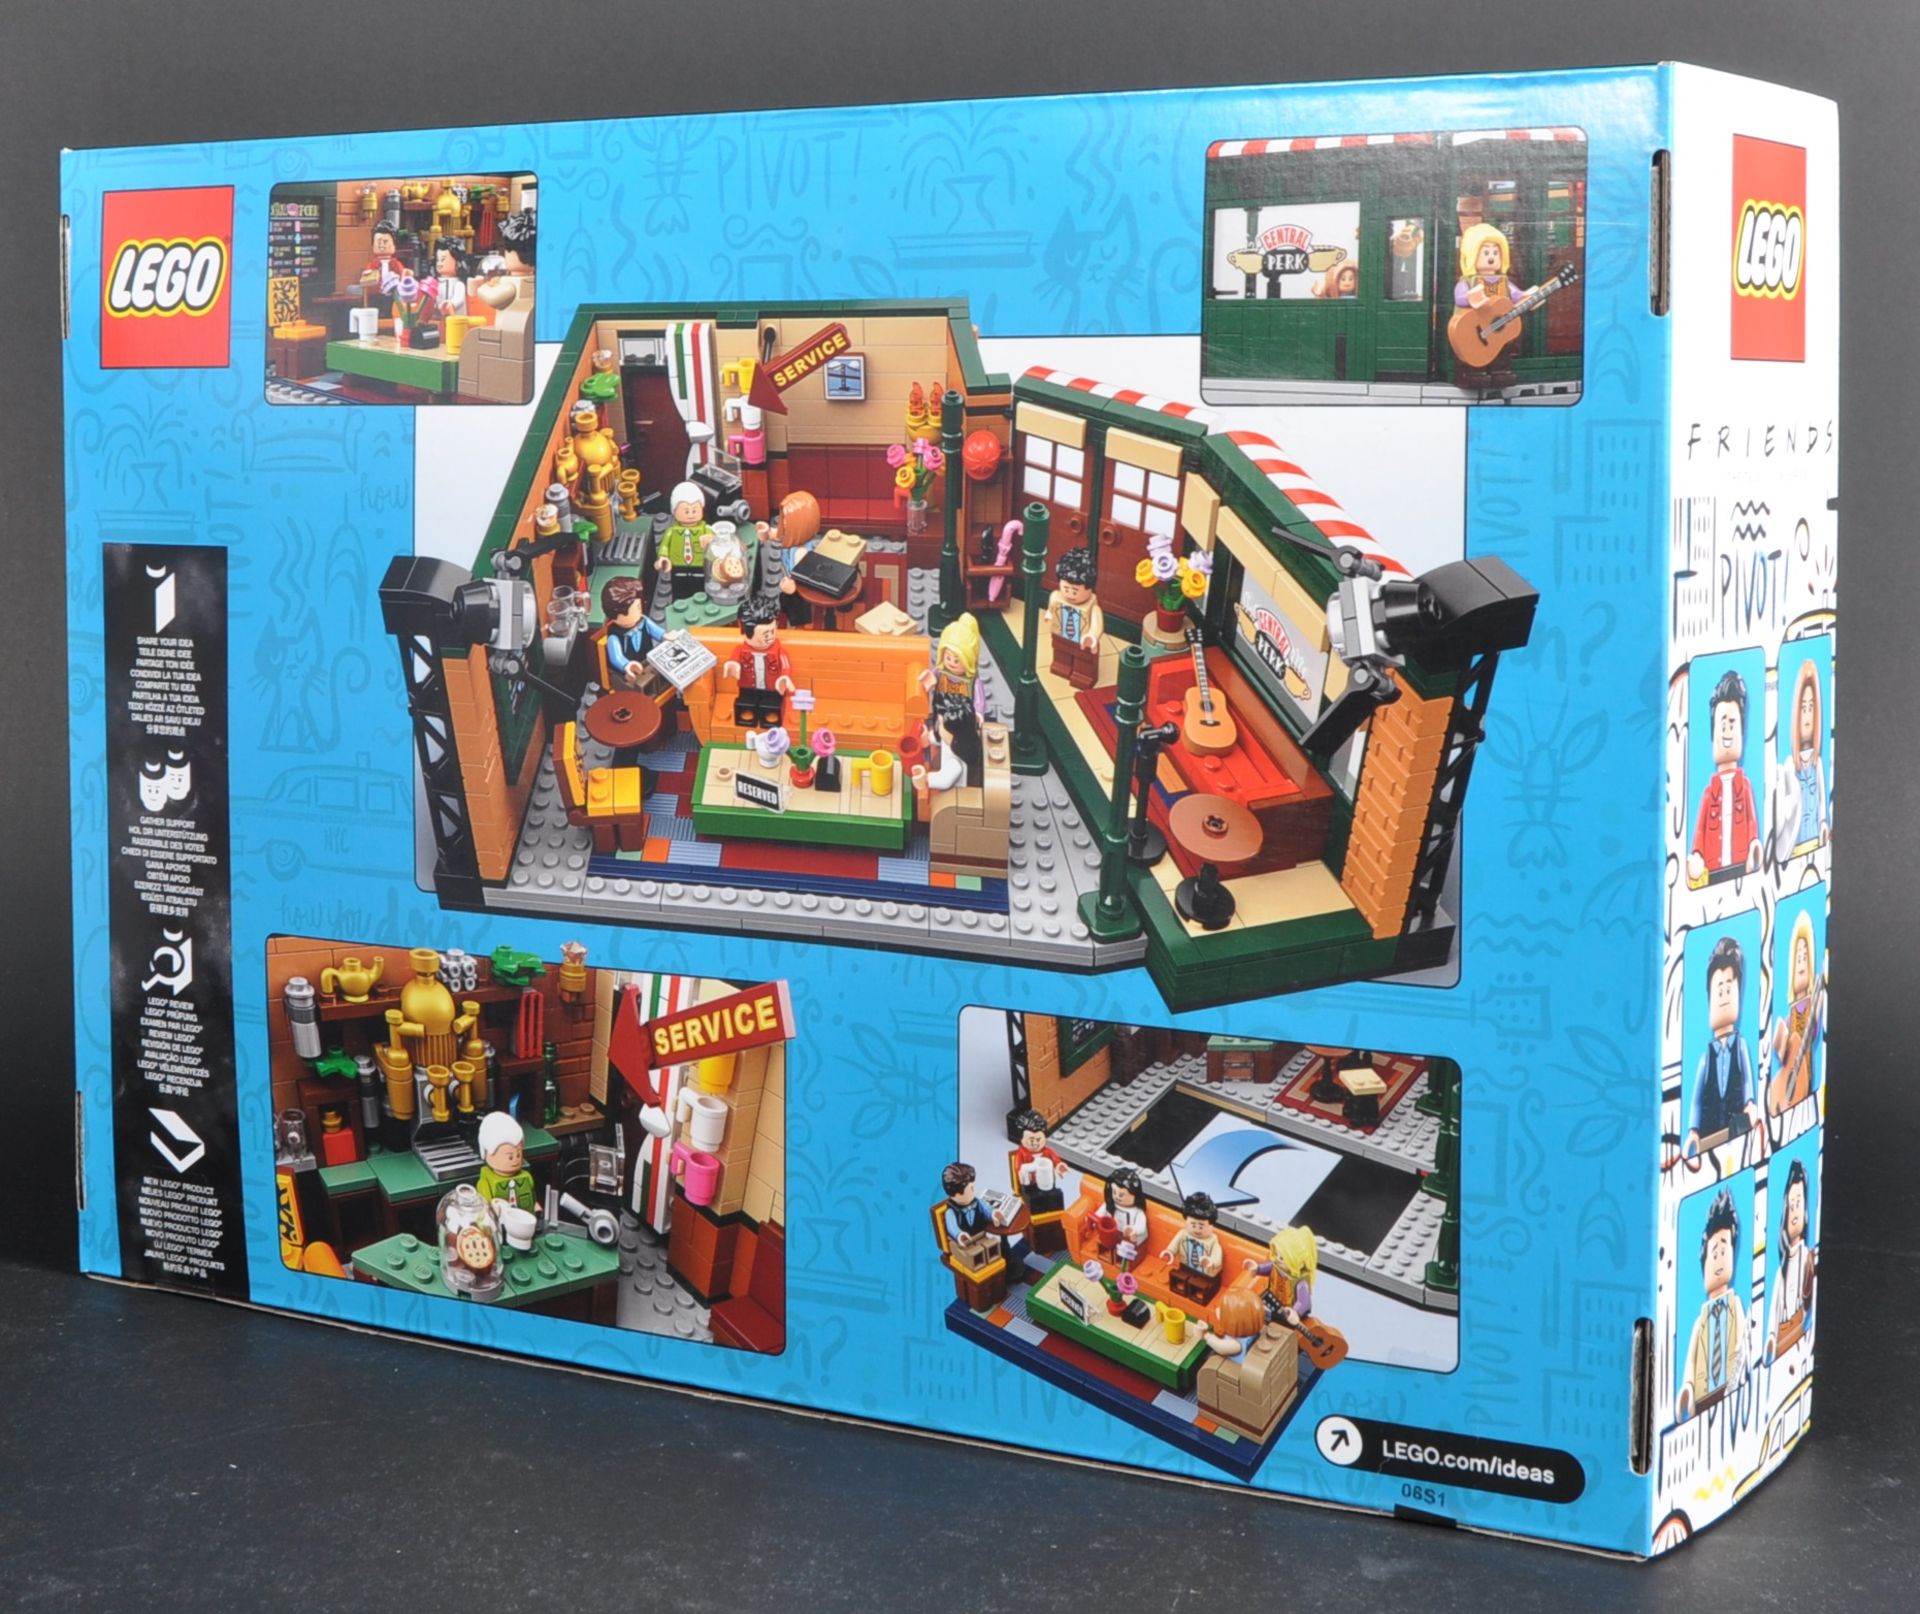 LEGO SET - FRIENDS - 21319 - CENTRAL PERK - Image 2 of 3